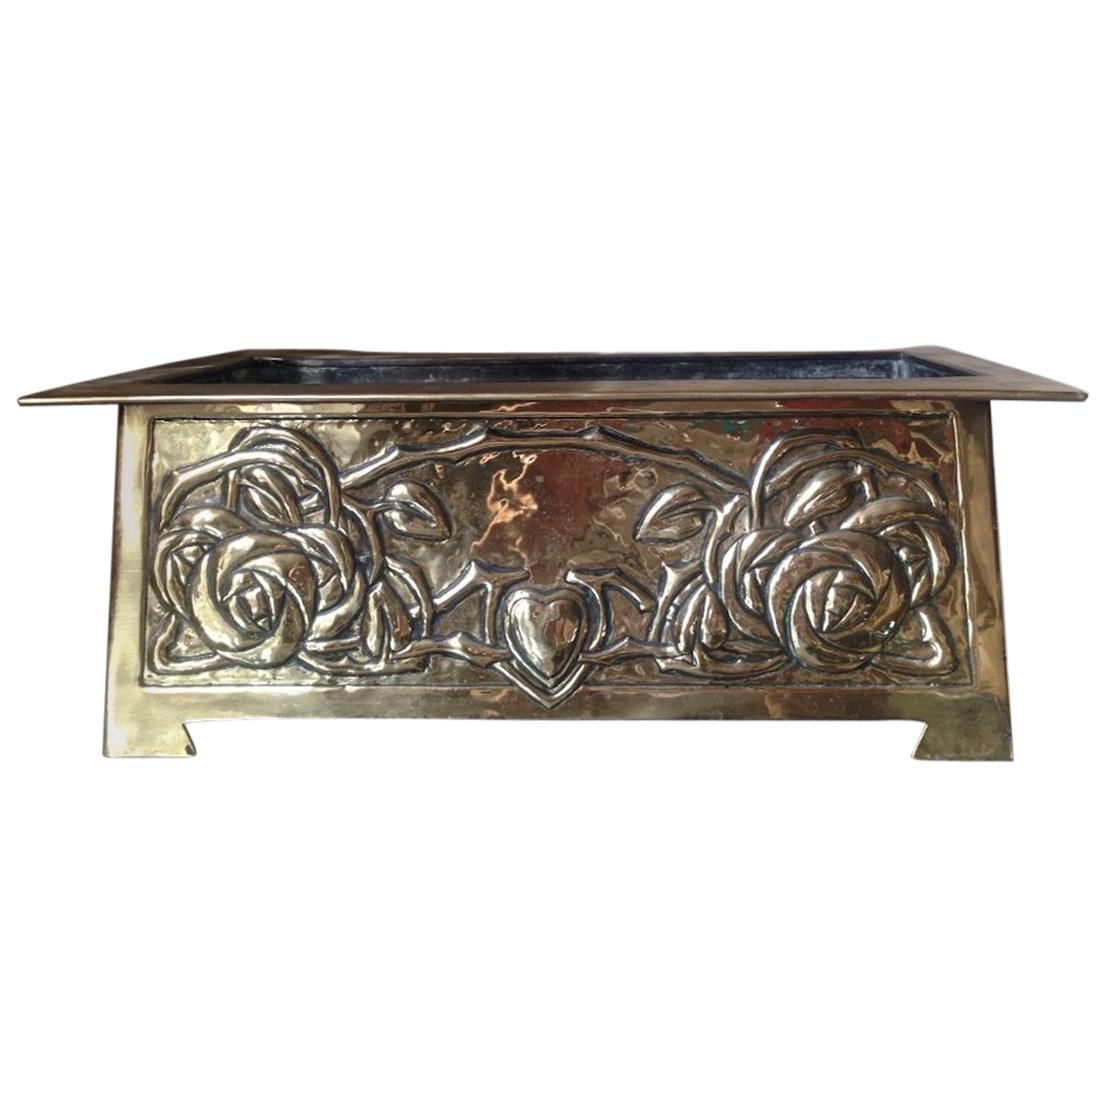 Margaret Gilmour, Attributed a Glasgow School Brass Planter with Stylised Roses